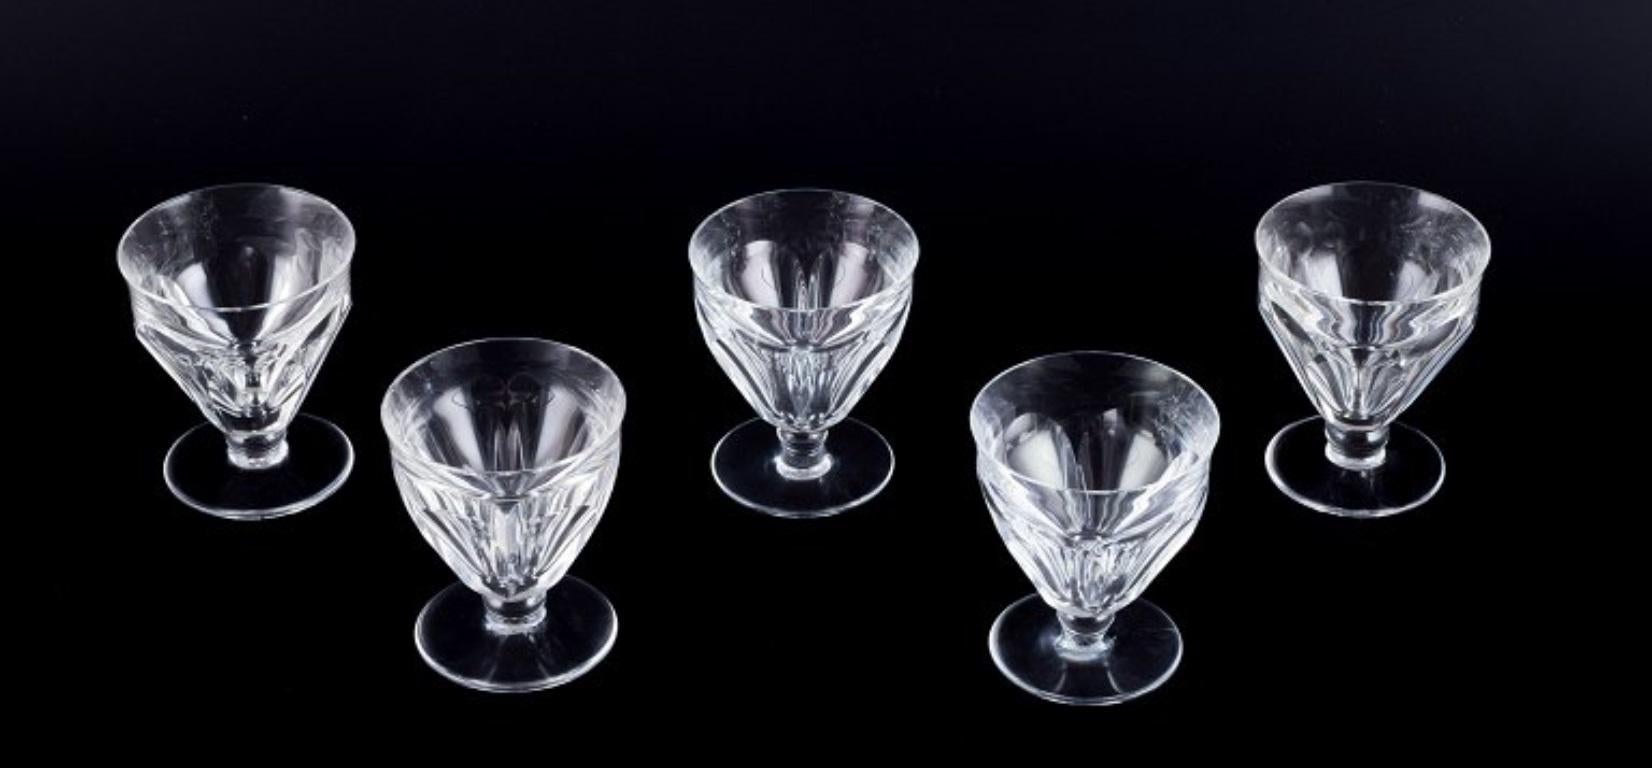 Baccarat, France. 
A set of five Art Deco sherry glasses in faceted cut crystal glass. 
On a round base. Handmade crystal glass.
1930s/1940s.
Marked.
Perfect condition.
Dimensions: D 6.7 cm x H 8.0 cm.

